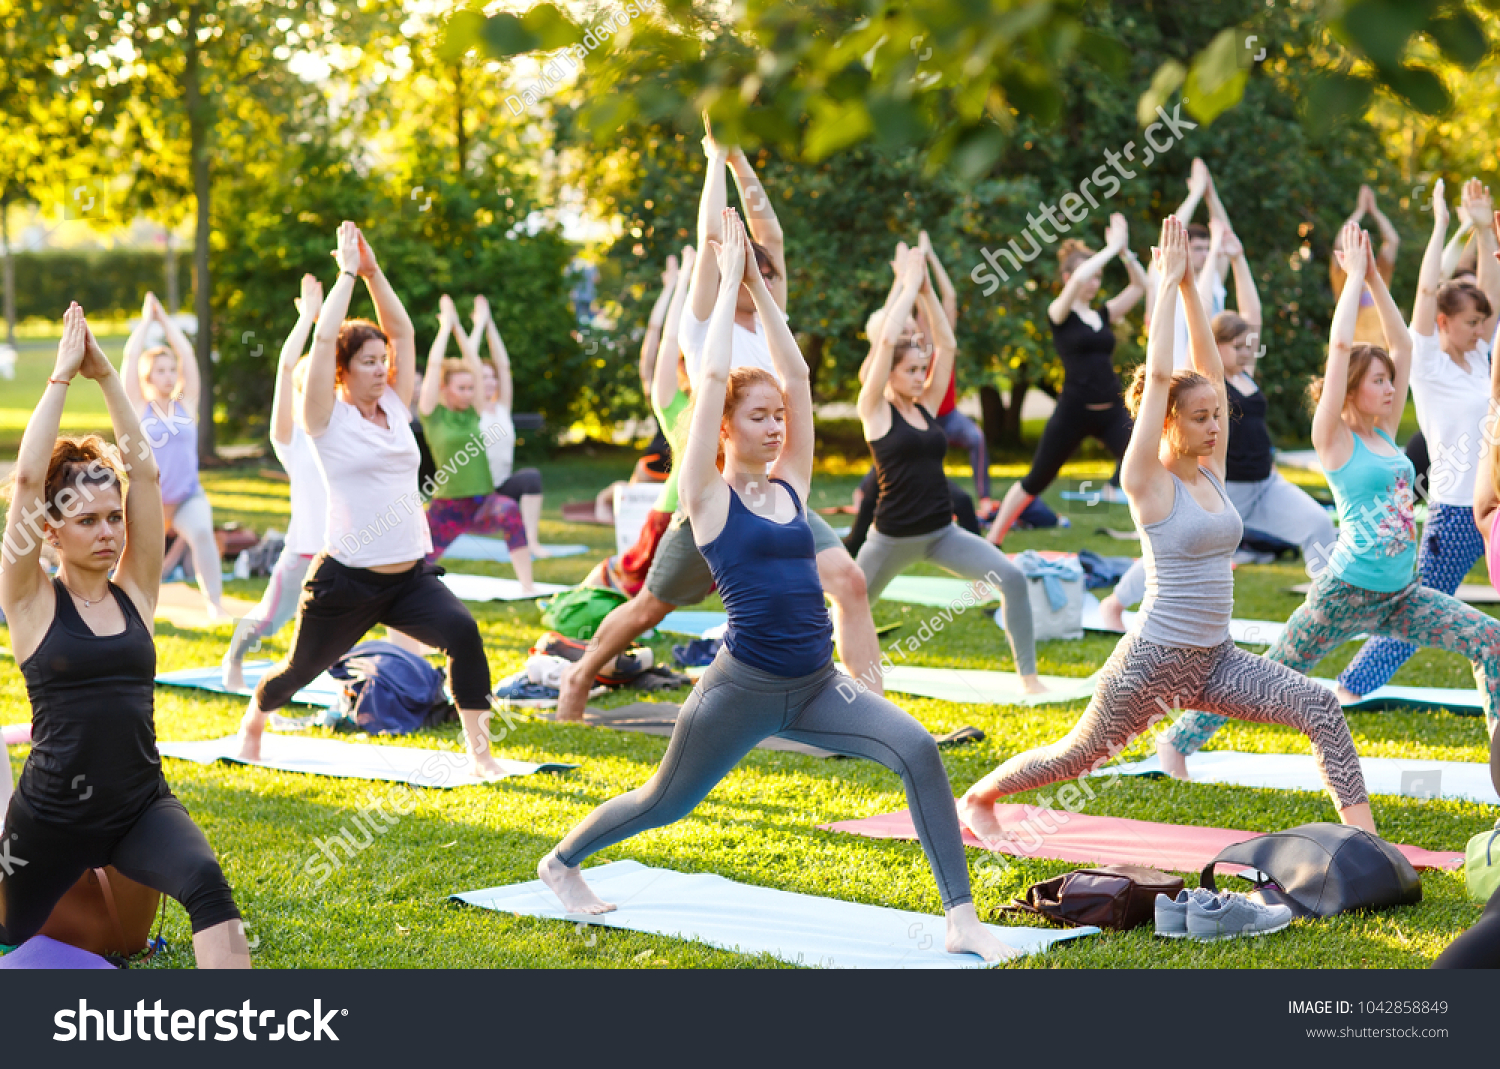 big group of adults attending a yoga class outside in park #1042858849